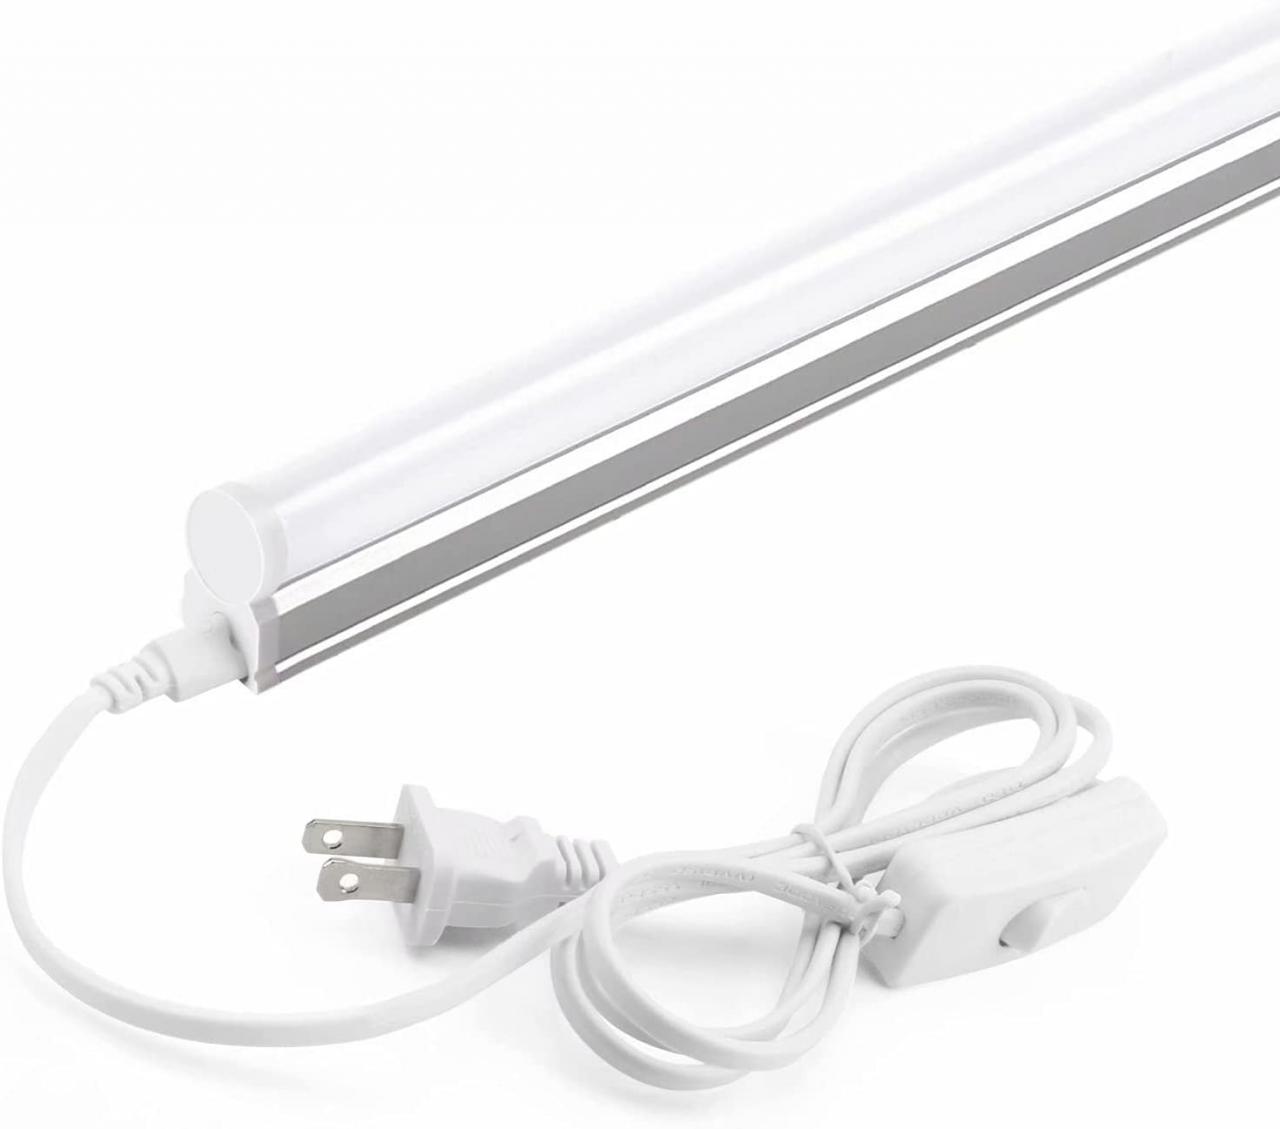 Buy Barrina LED T5 Integrated Single Fixture, 4FT, 2200lm, 6500K (Super  Bright White), 20W, Utility Shop Light, Ceiling and Under Cabinet Light,  Grow Light with Built-in ON/Off Switch Online in Taiwan. B01HBT32PW